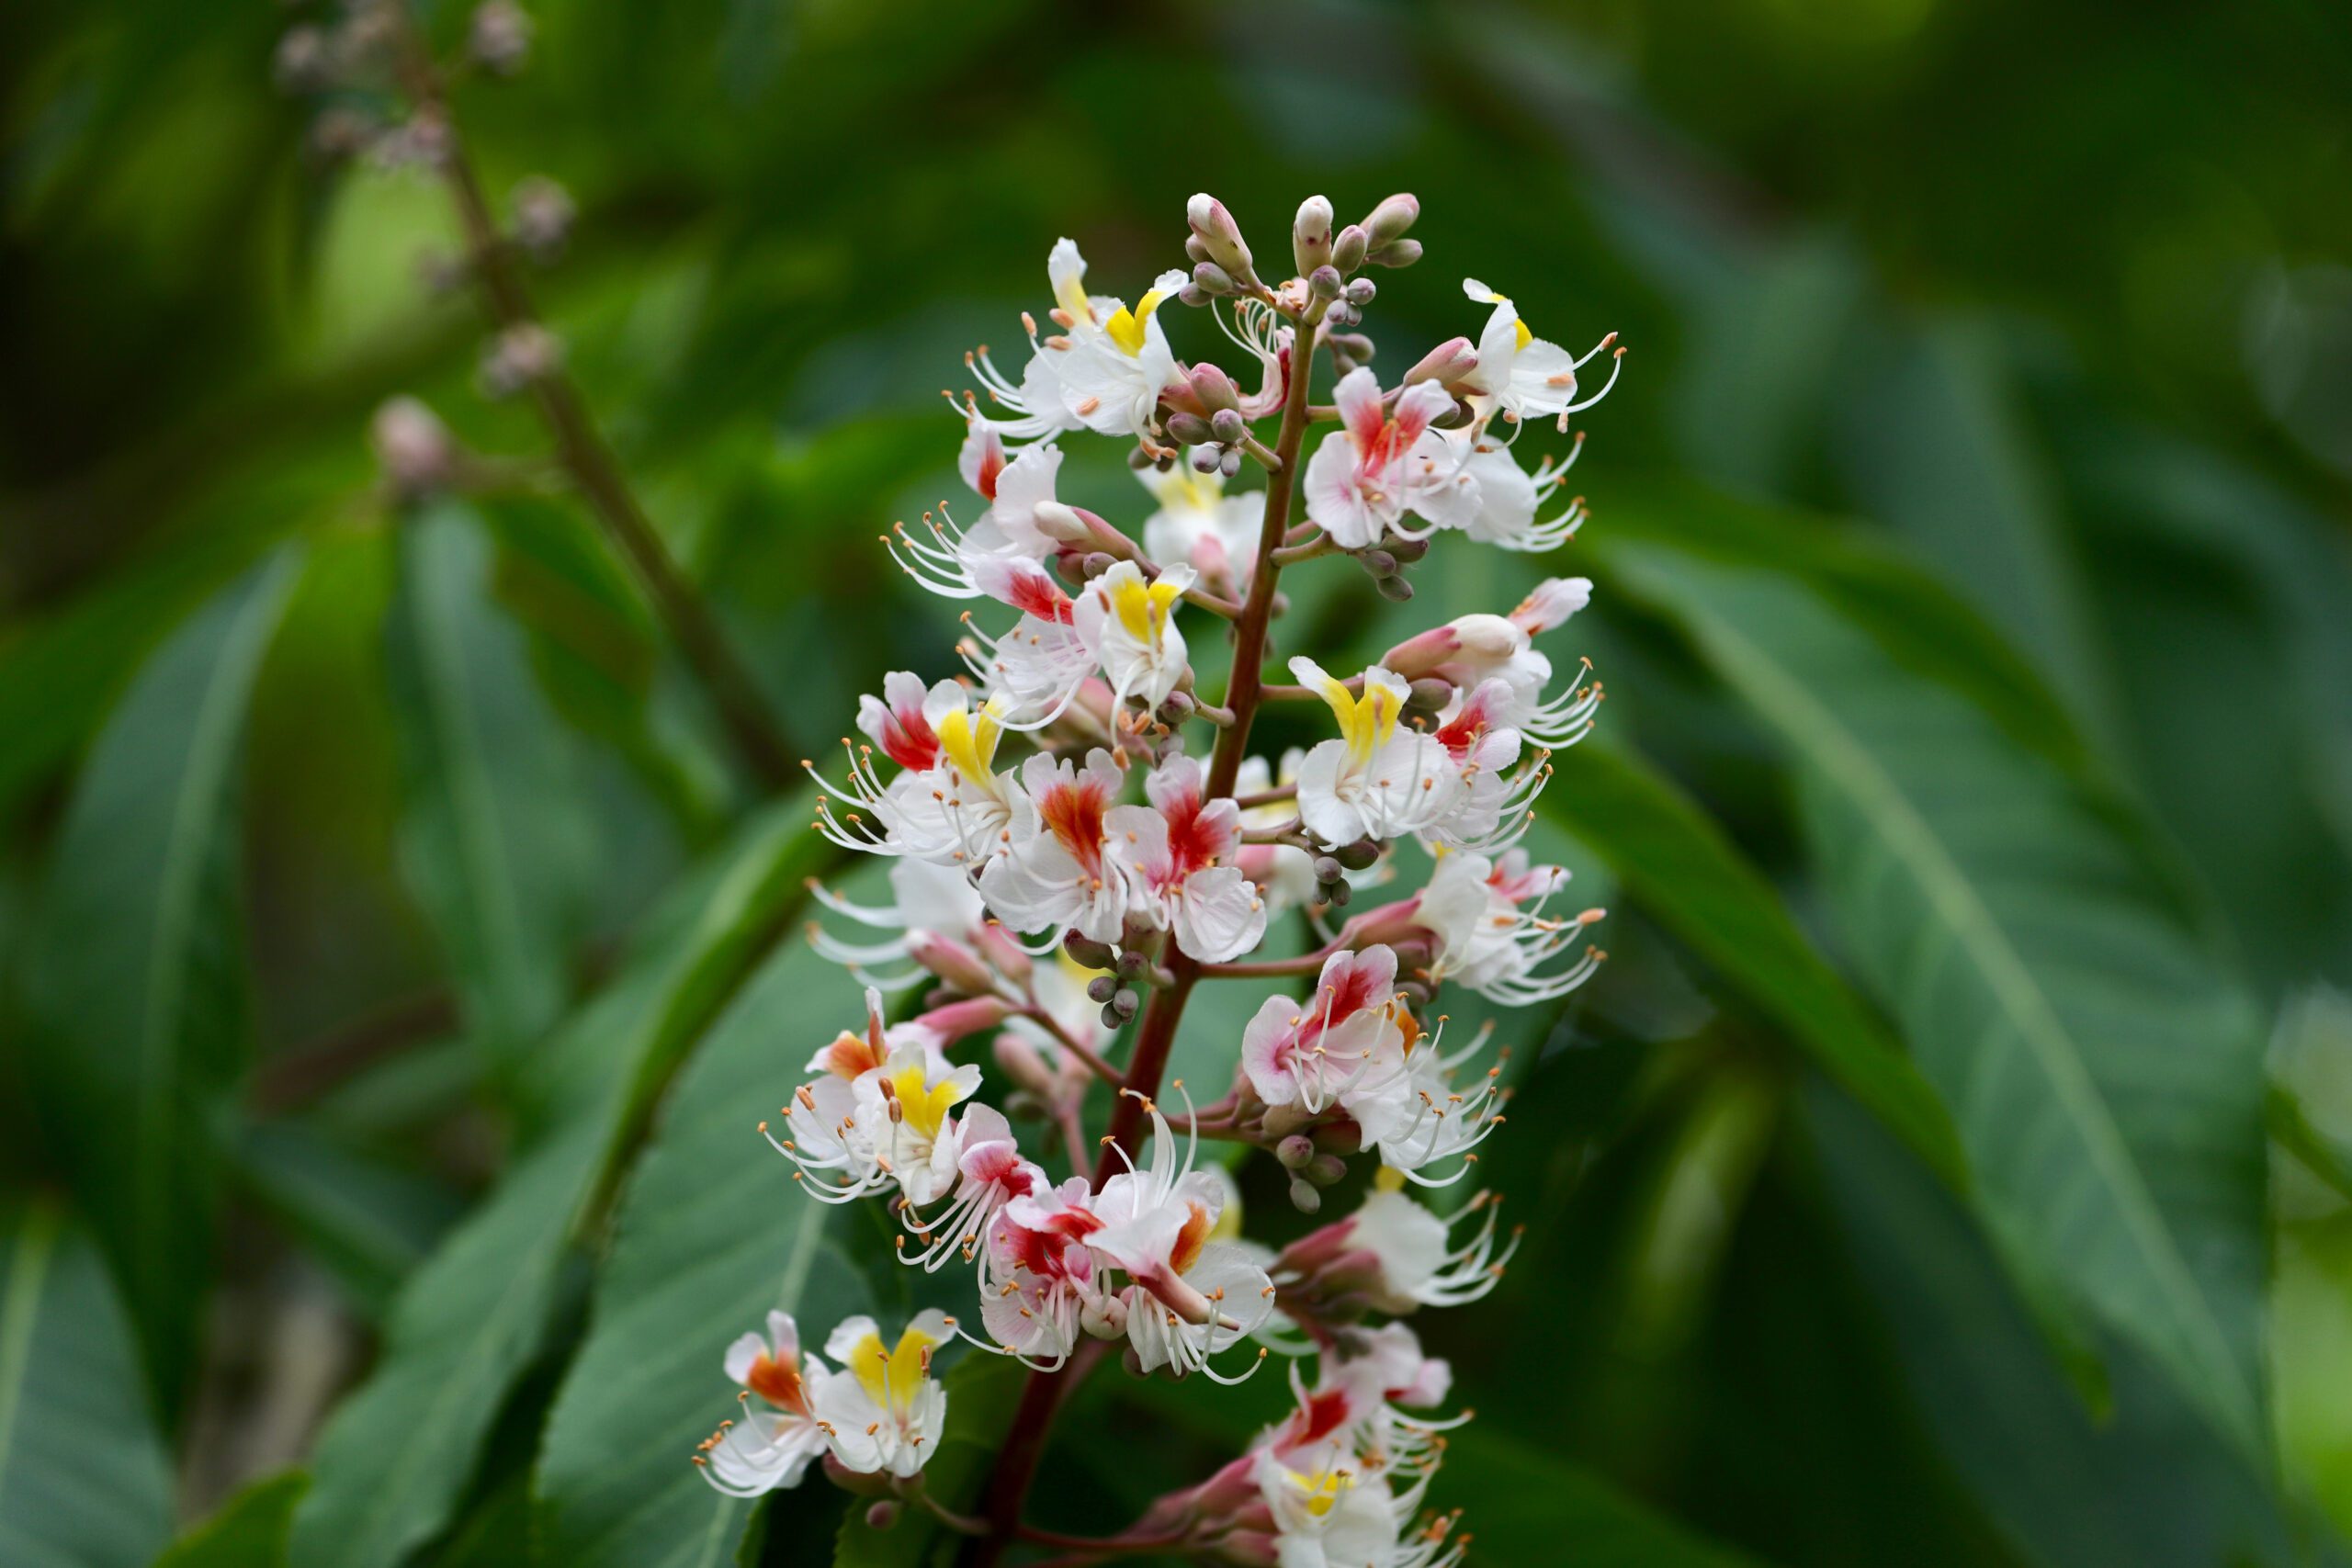 Aesculus indicia flower blossoms